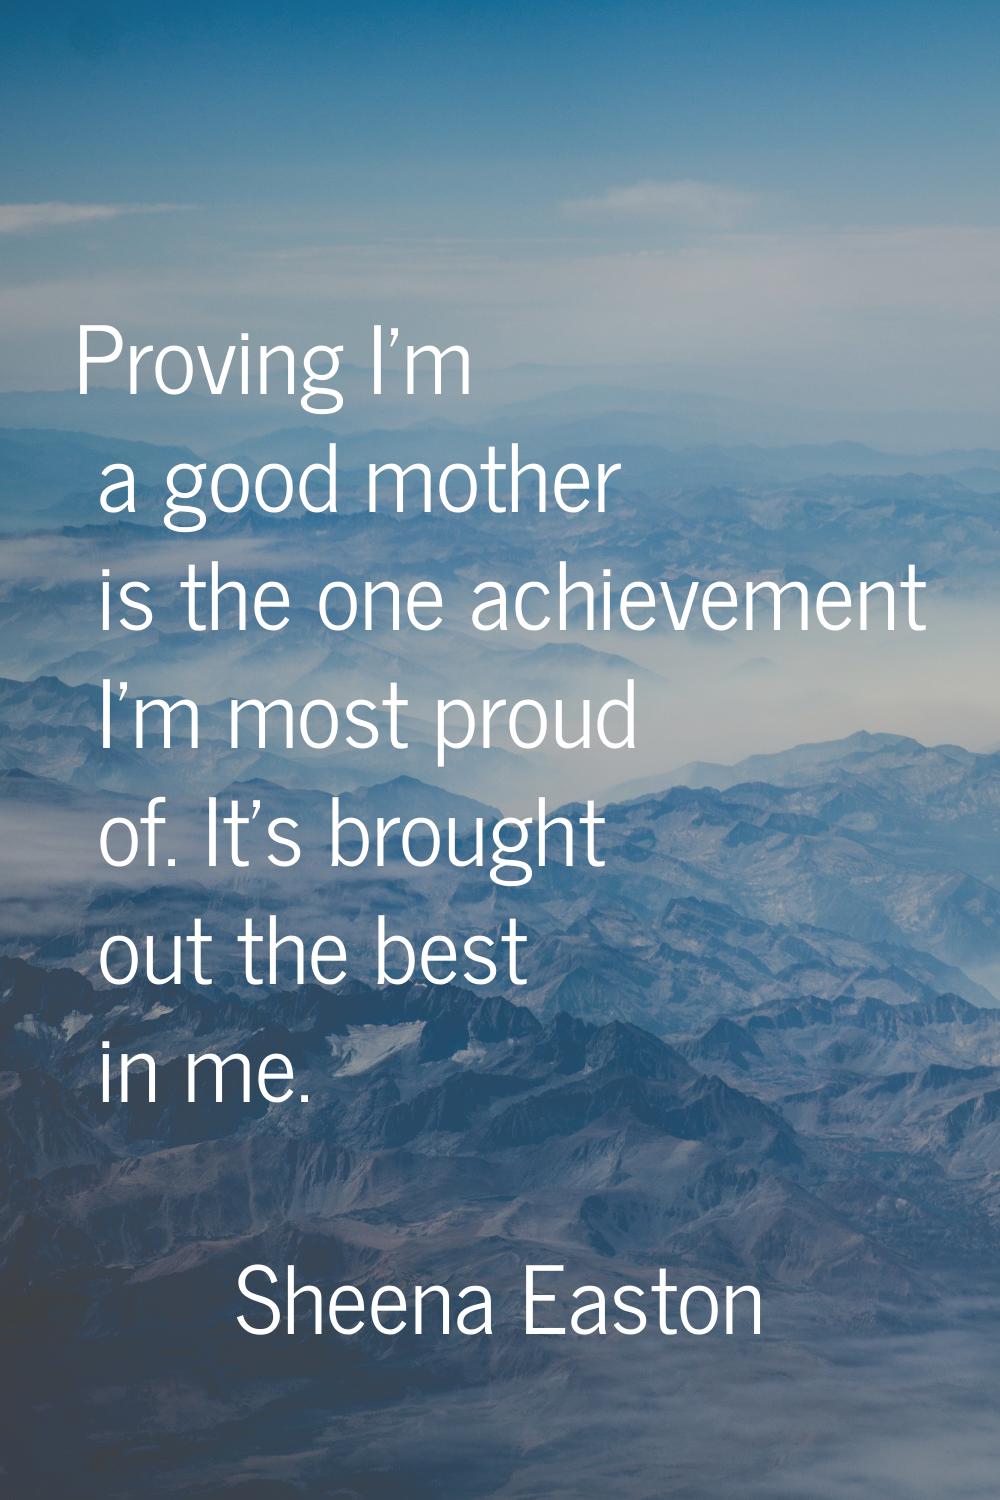 Proving I'm a good mother is the one achievement I'm most proud of. It's brought out the best in me